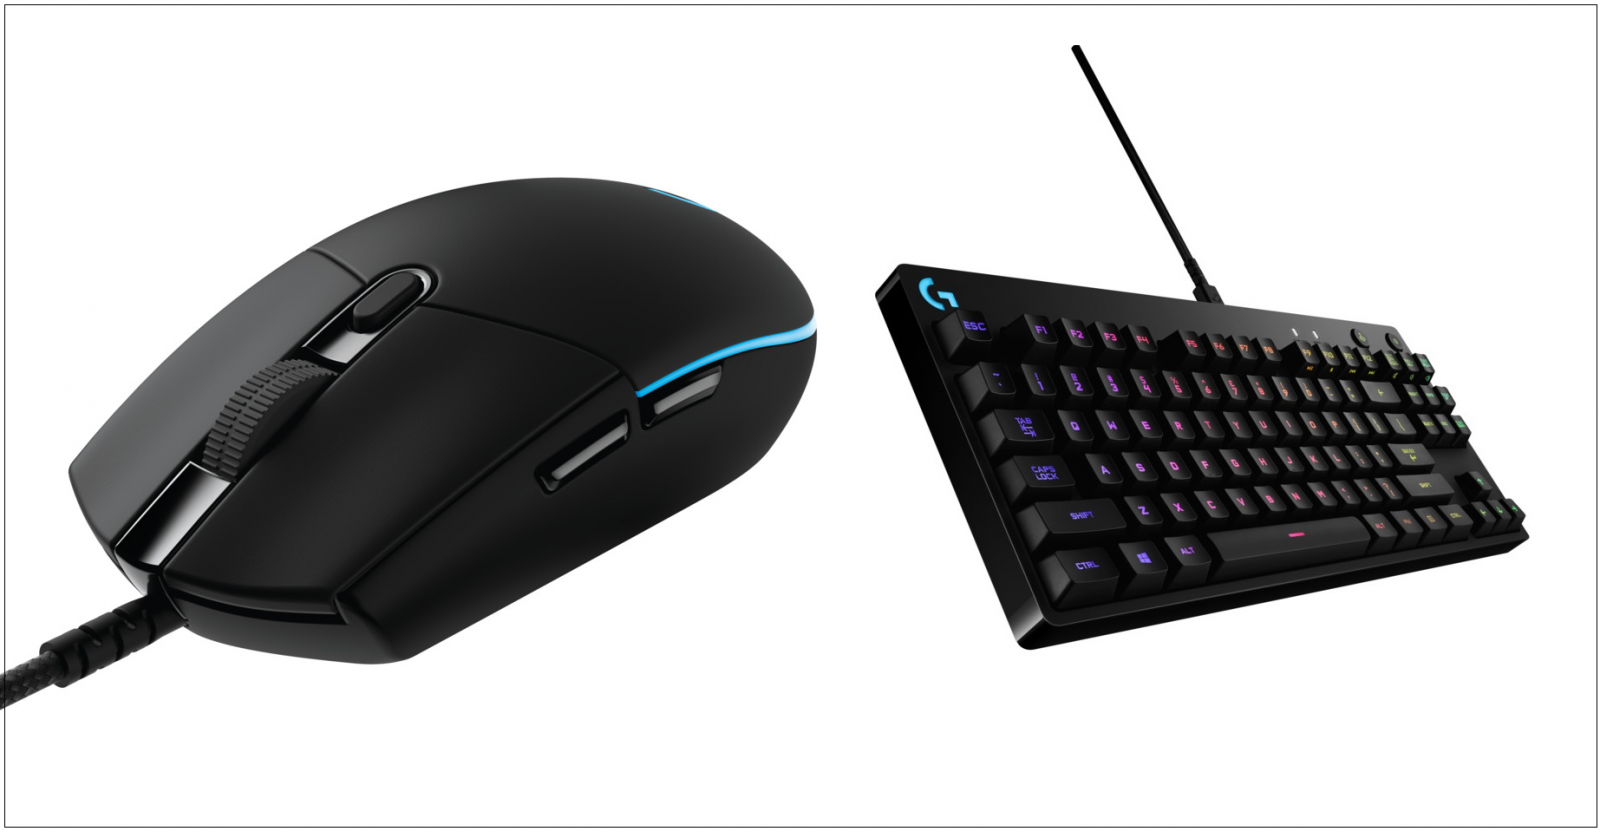 Logitech tries to woo pro eSports players with new devices